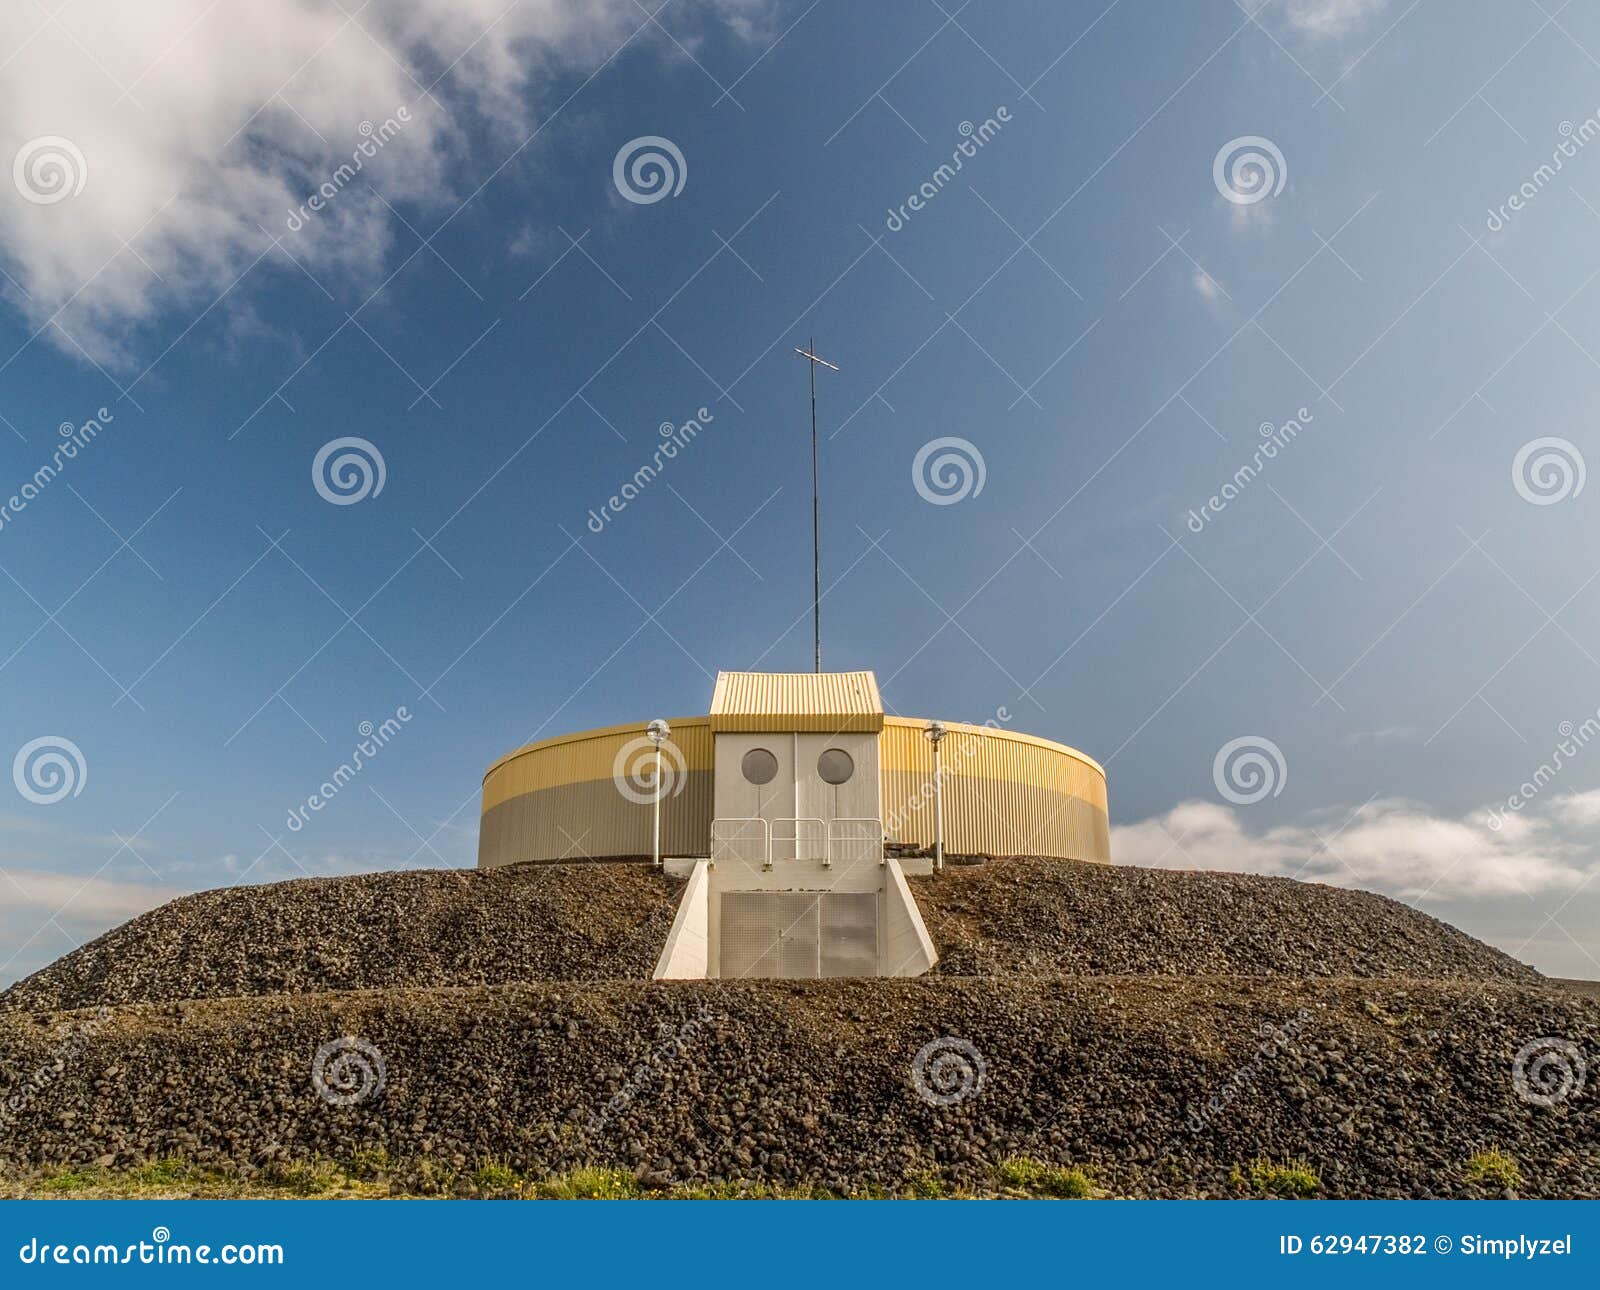 Round Building Iceland stock photo. Image of building - 62947382